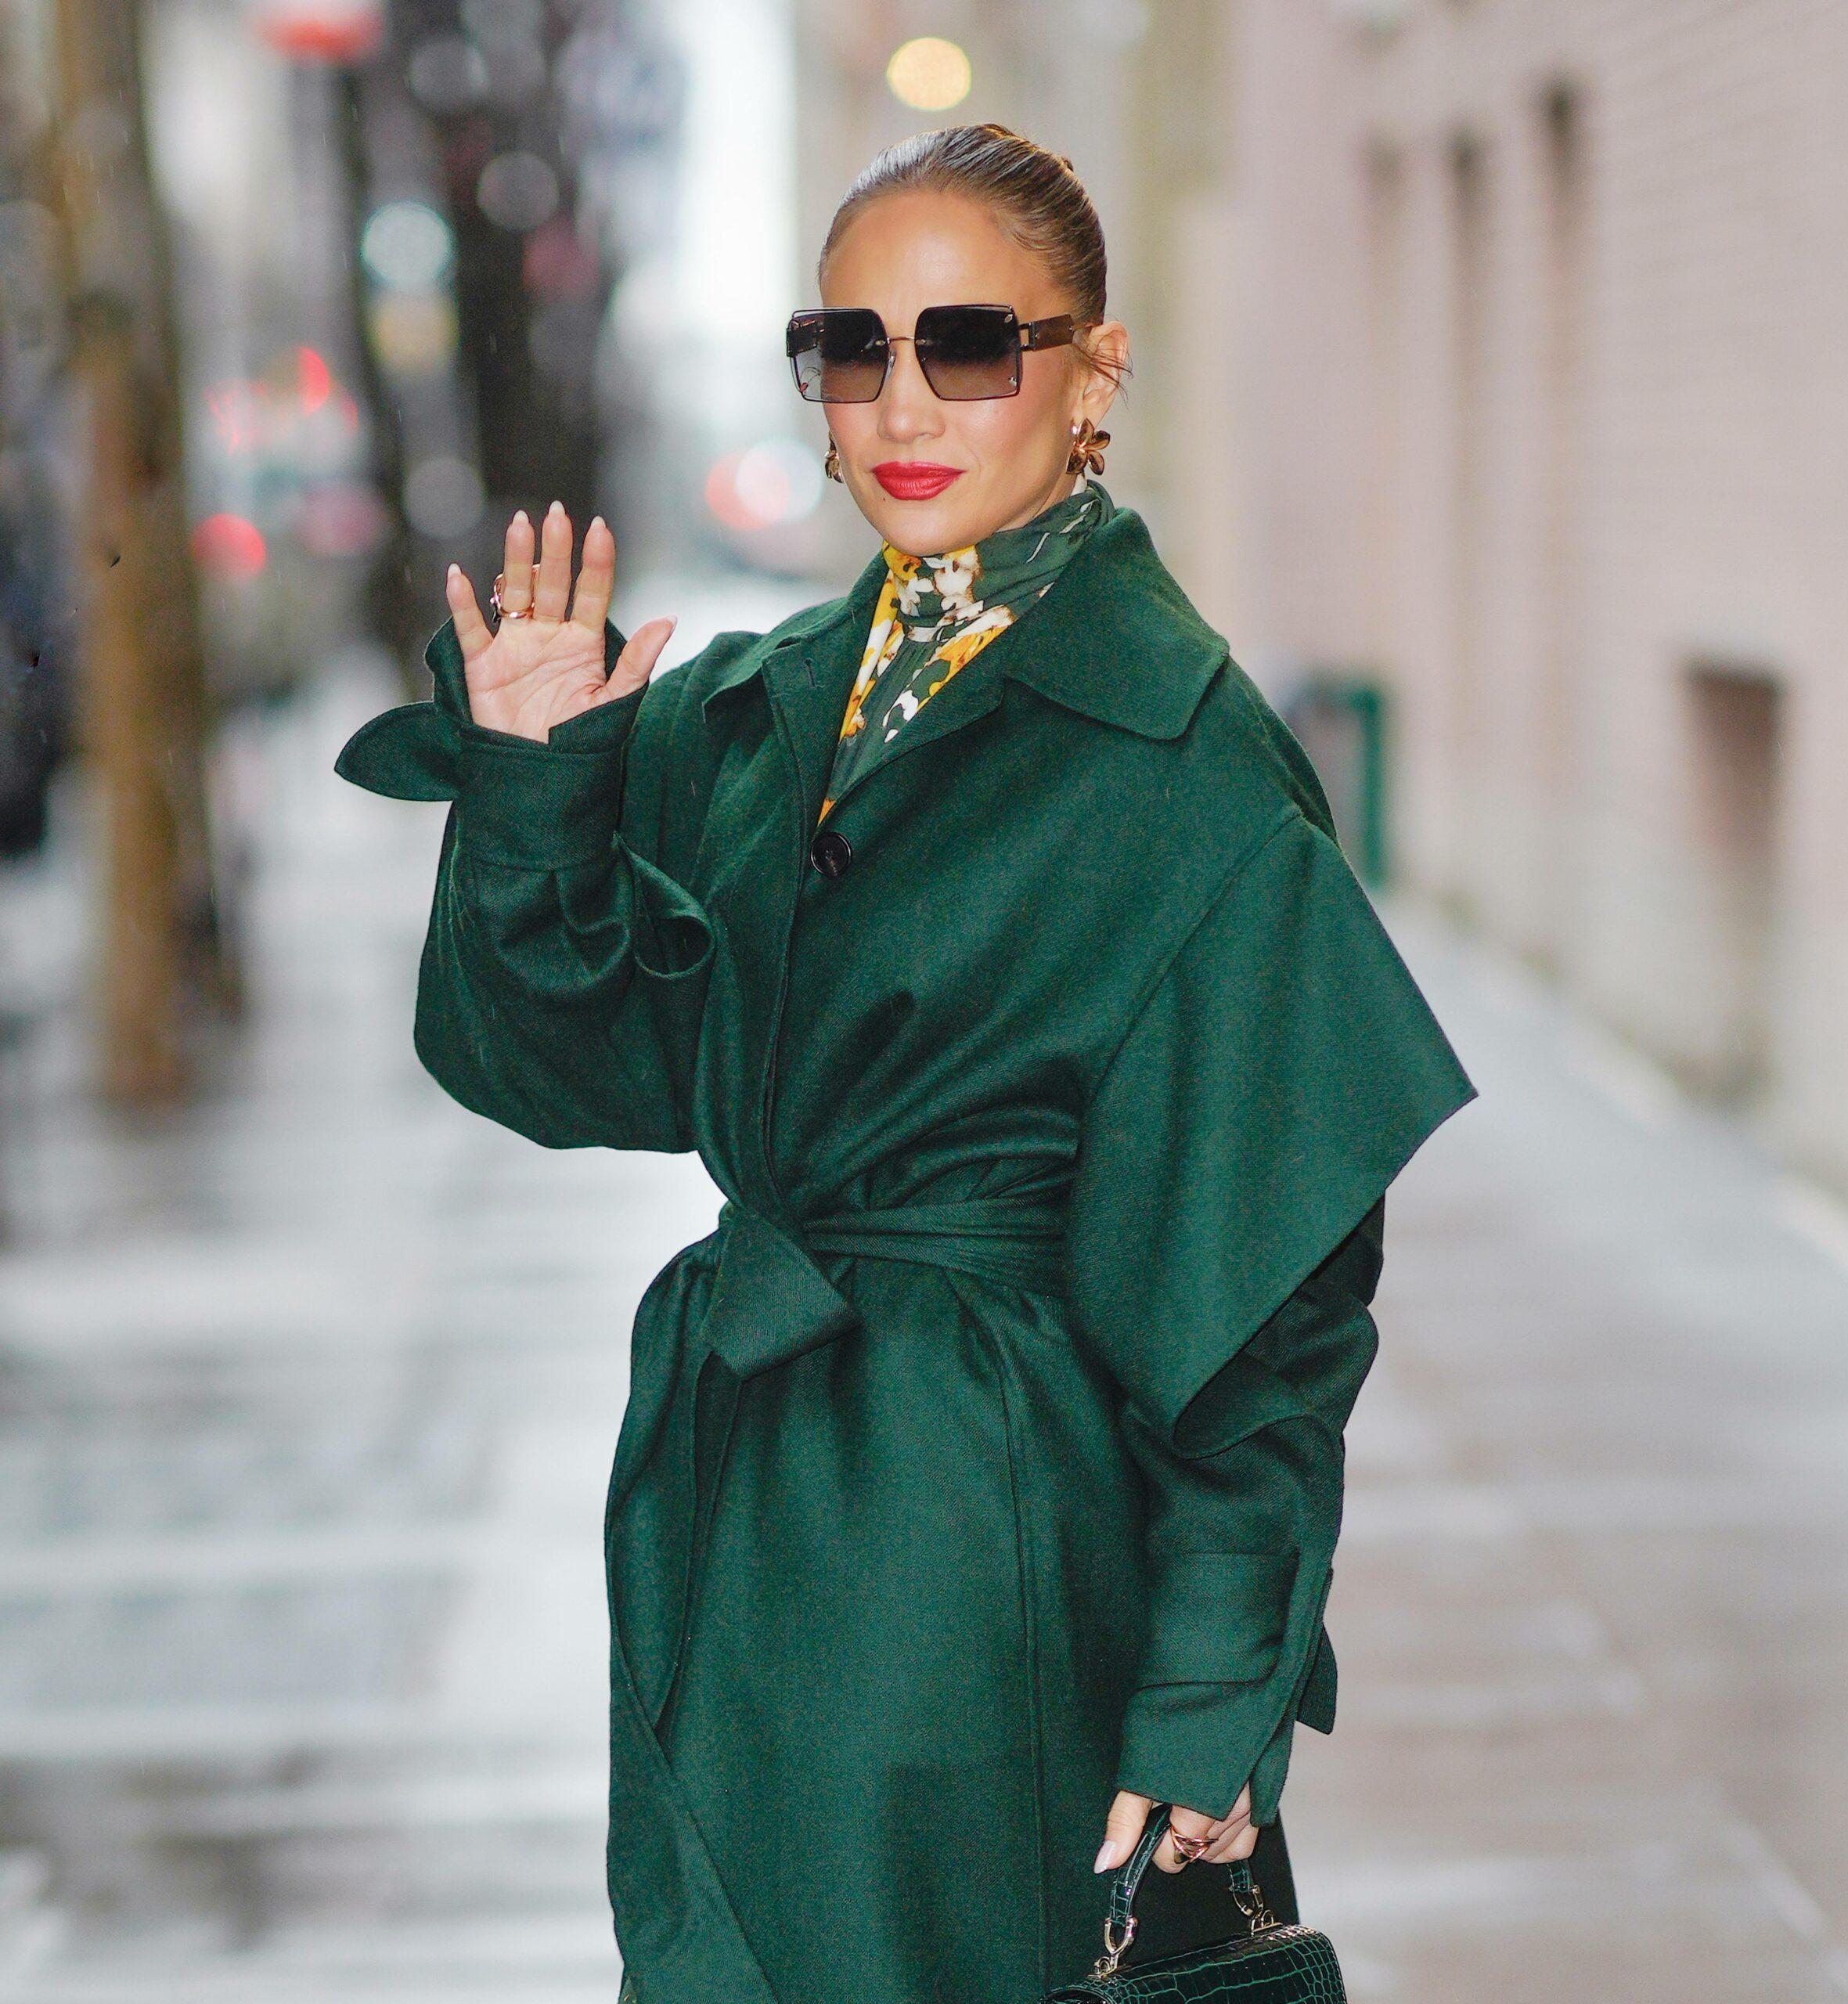 JLo Just Proved Everyone Needs THIS Dress in Their Closet!